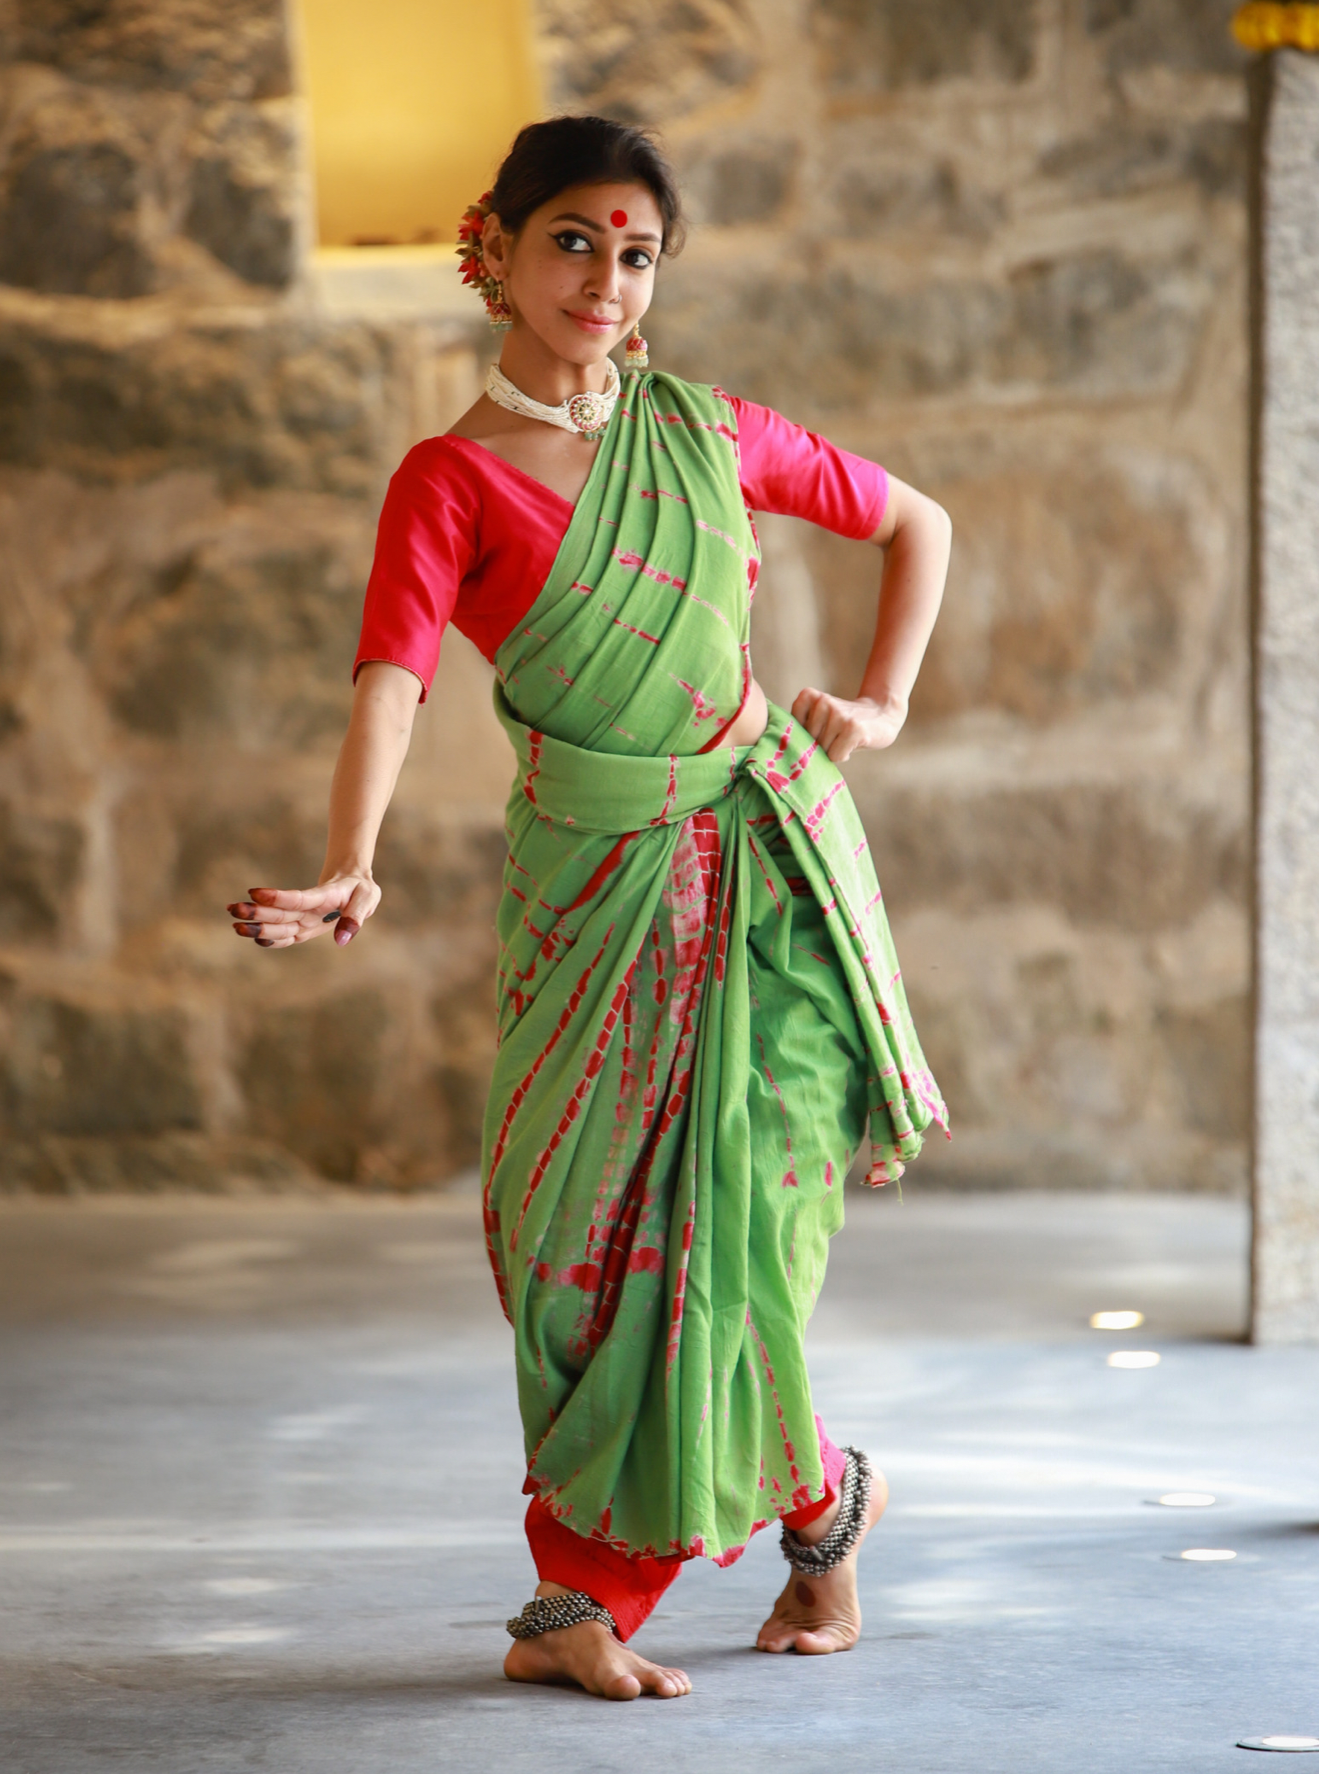 Extra long cotton practice saree specially designed for dancers, hand block printed all the way from Jaipur. Want something unique for your practice sessions? Perfect to sweat it out in dance class for all your Bharatanatyam, Kuchipudi, Odissi dancers!